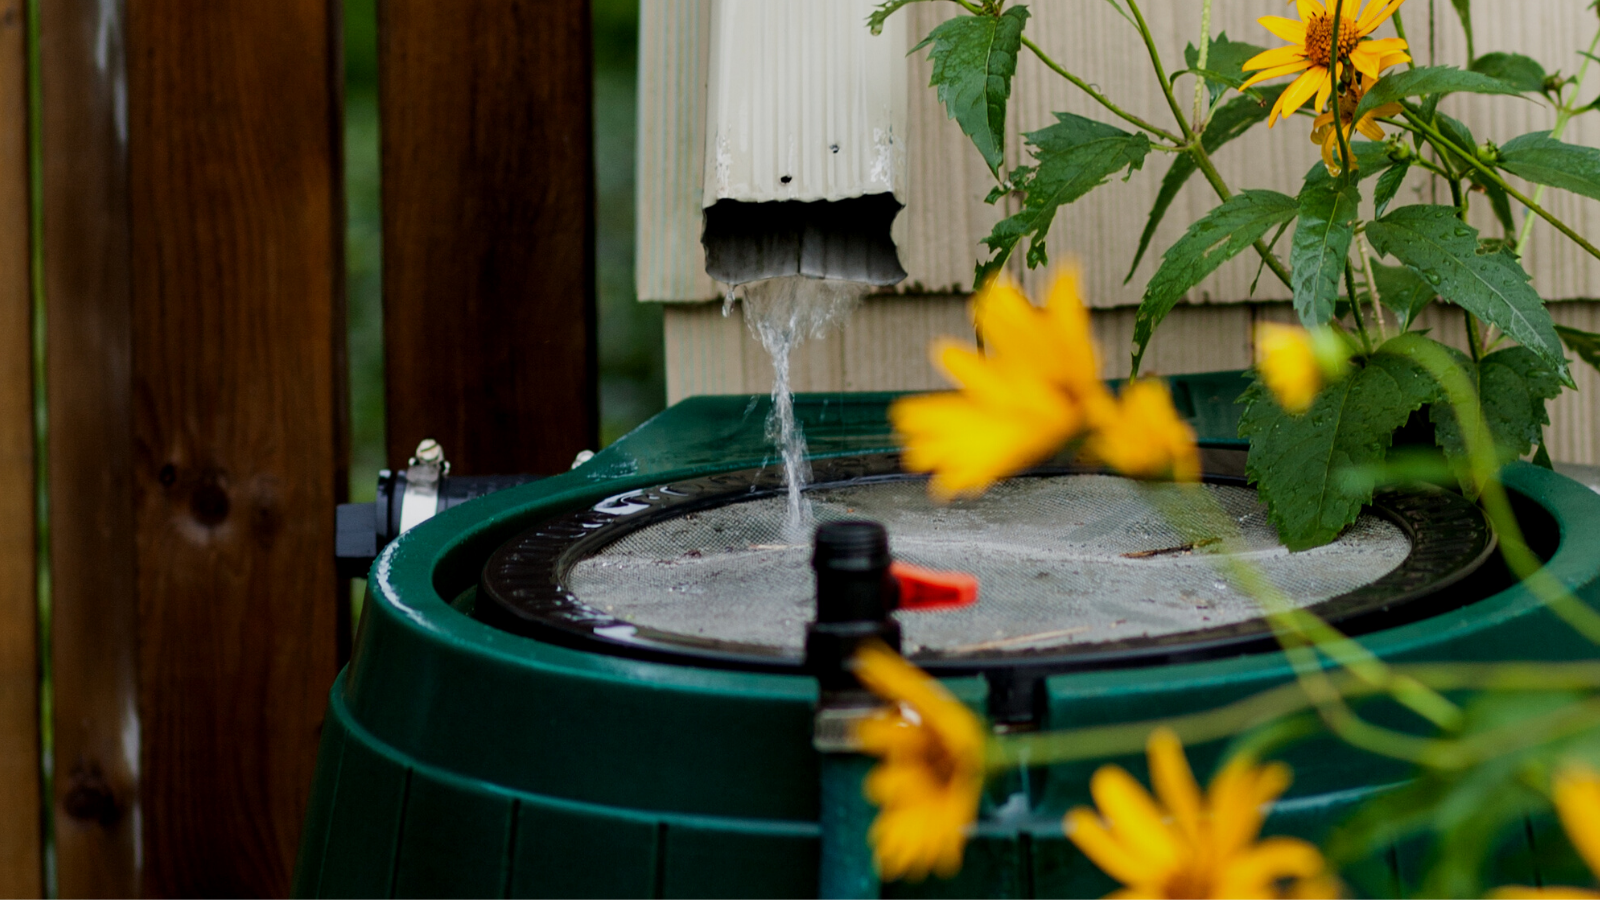 Water running out of a downspout and into a rain barrel.